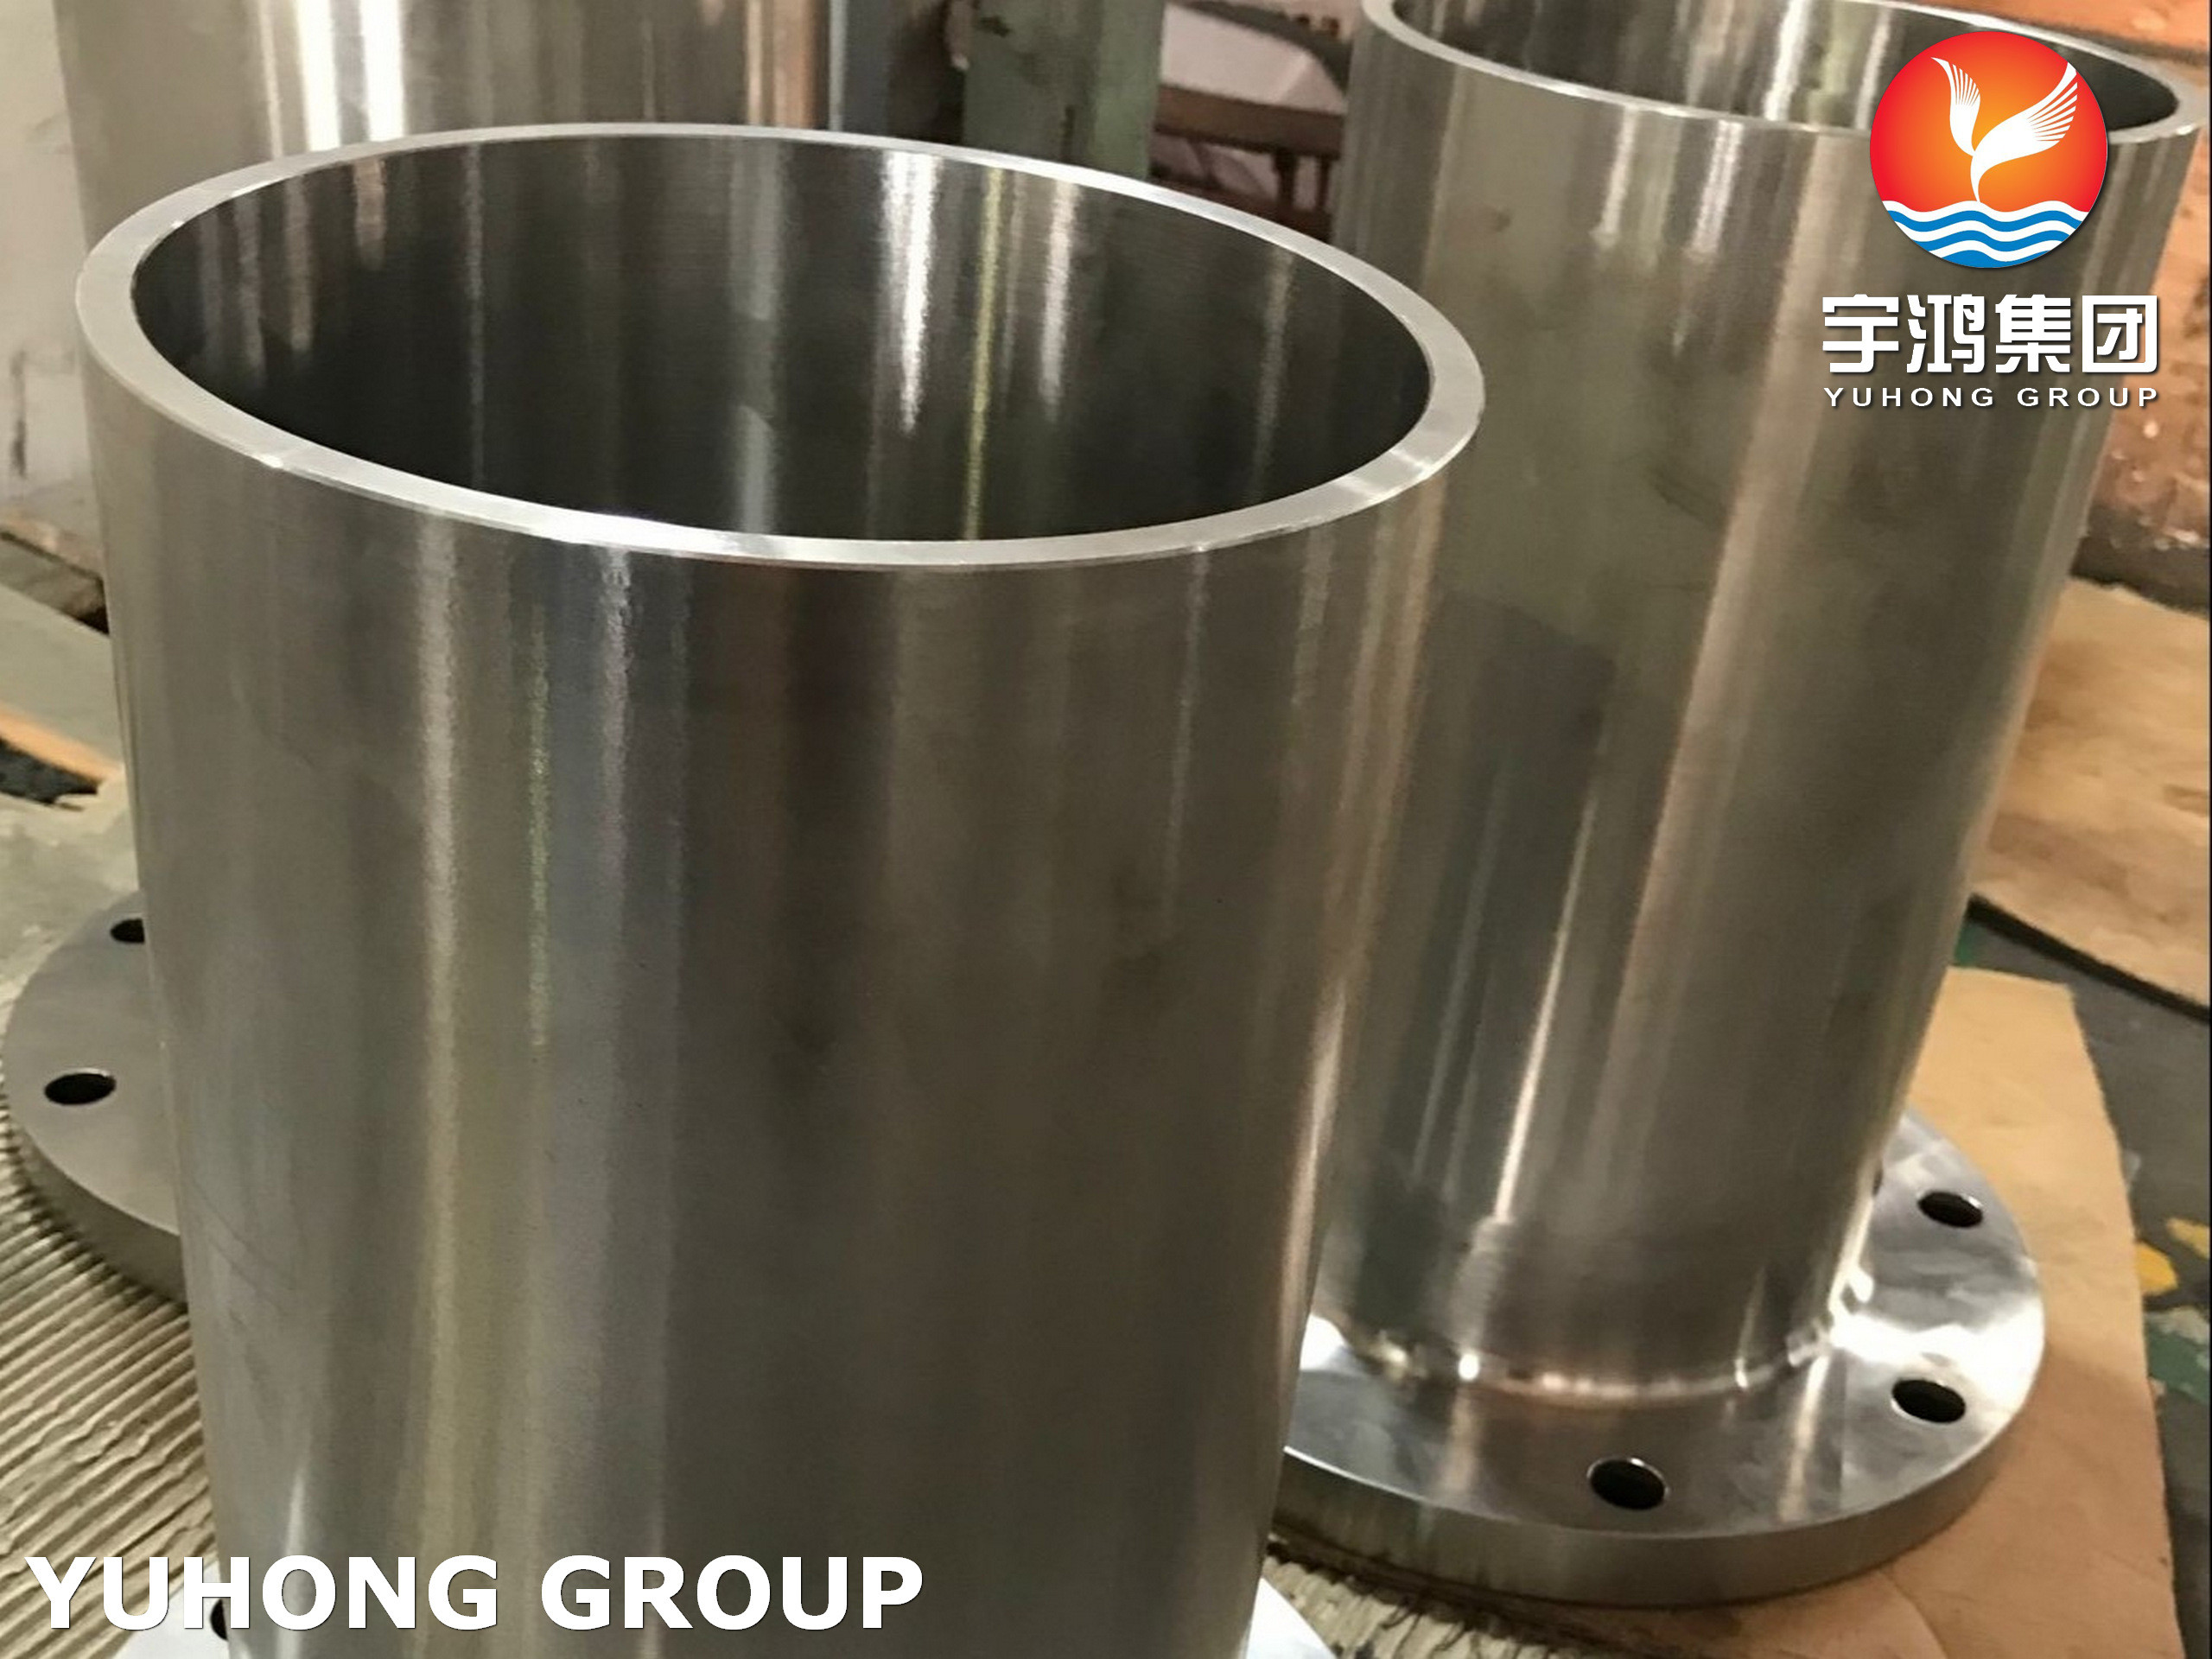 China STAINLESS STEEL LONG WELD NECK FLANGE FLAT FACE ASTM A182 CL150 S32750 FFLWN wholesale